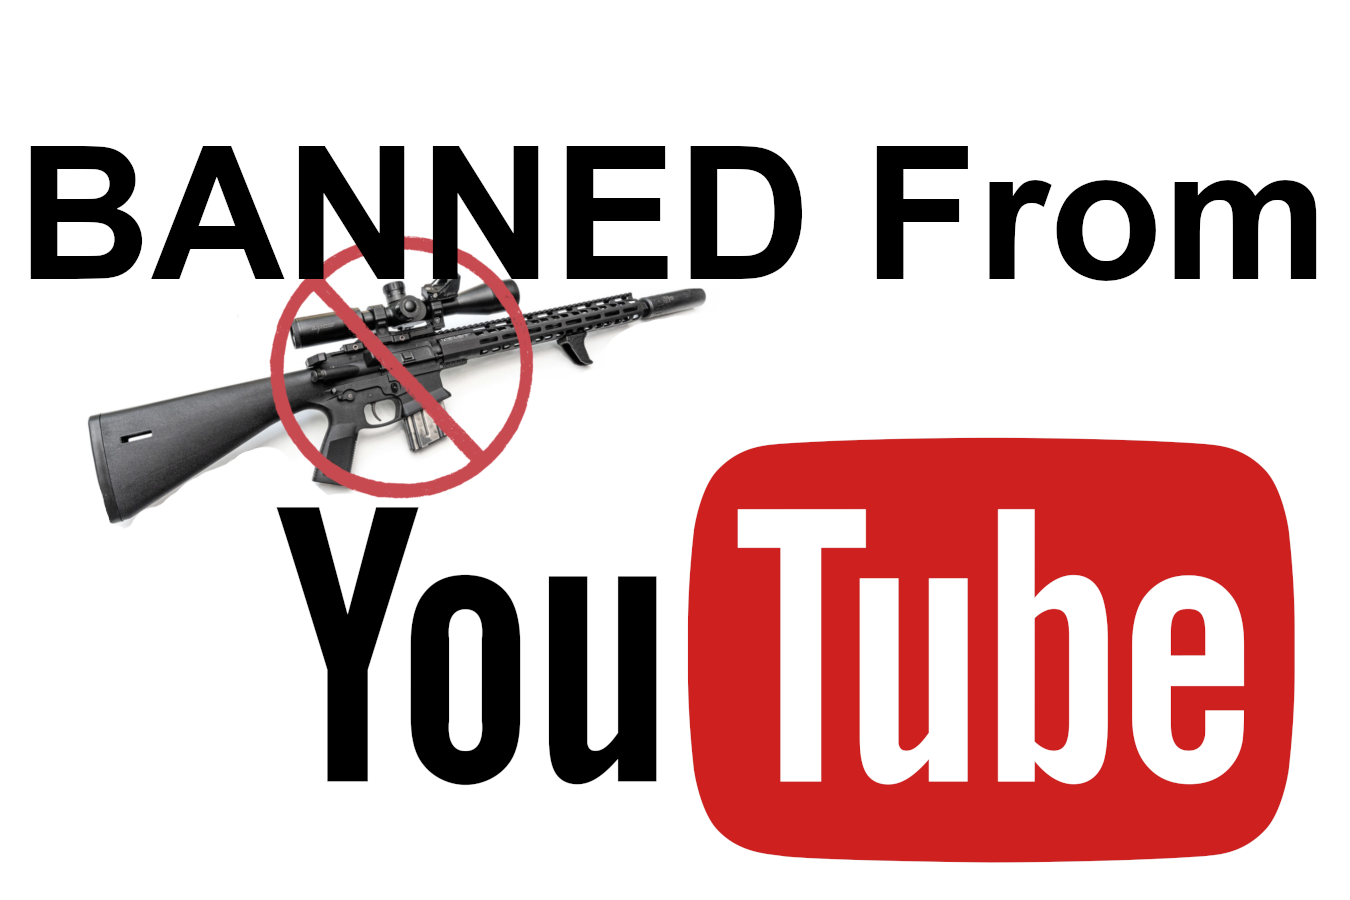 YouTube Censorship Losing The Battle For 1A and 2A RECOIL image